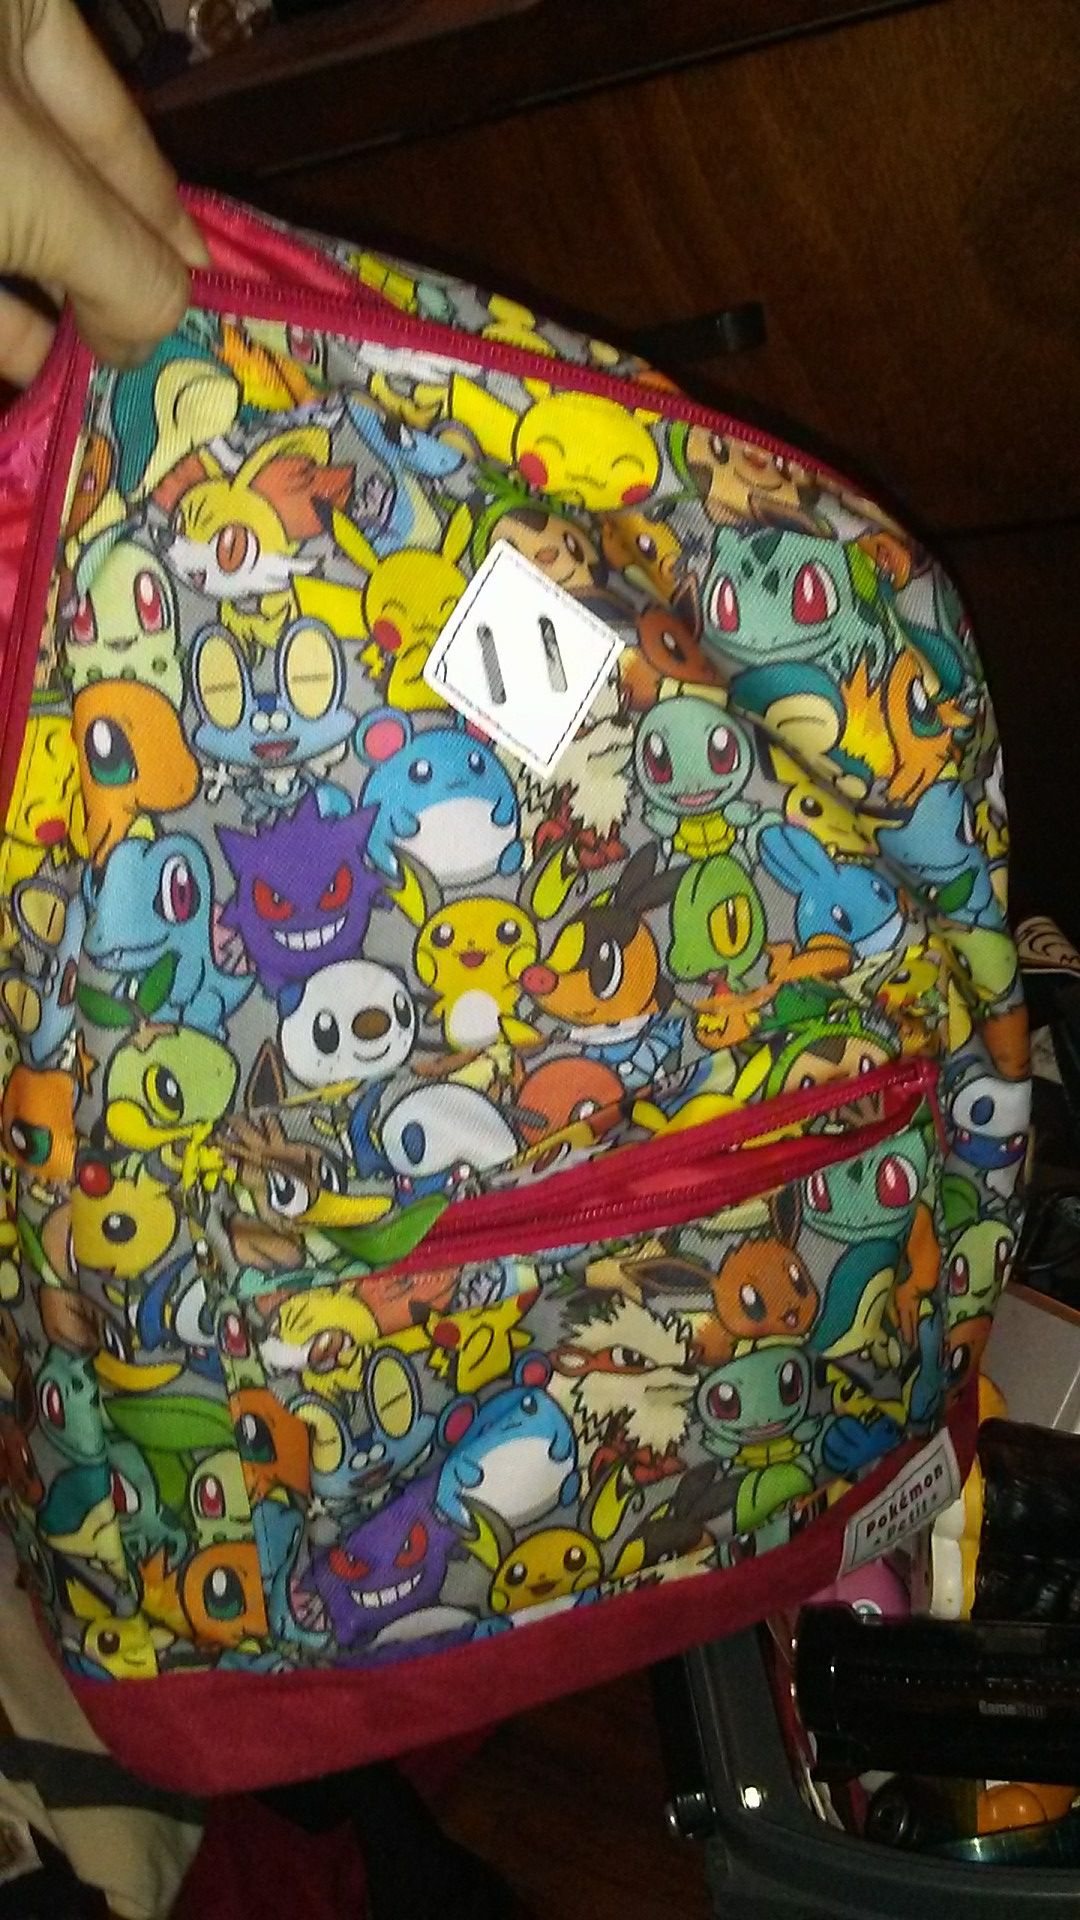 Petite pokemon bag. Brand new kid or women size. Perfect for holding collectibles or going bavk to school